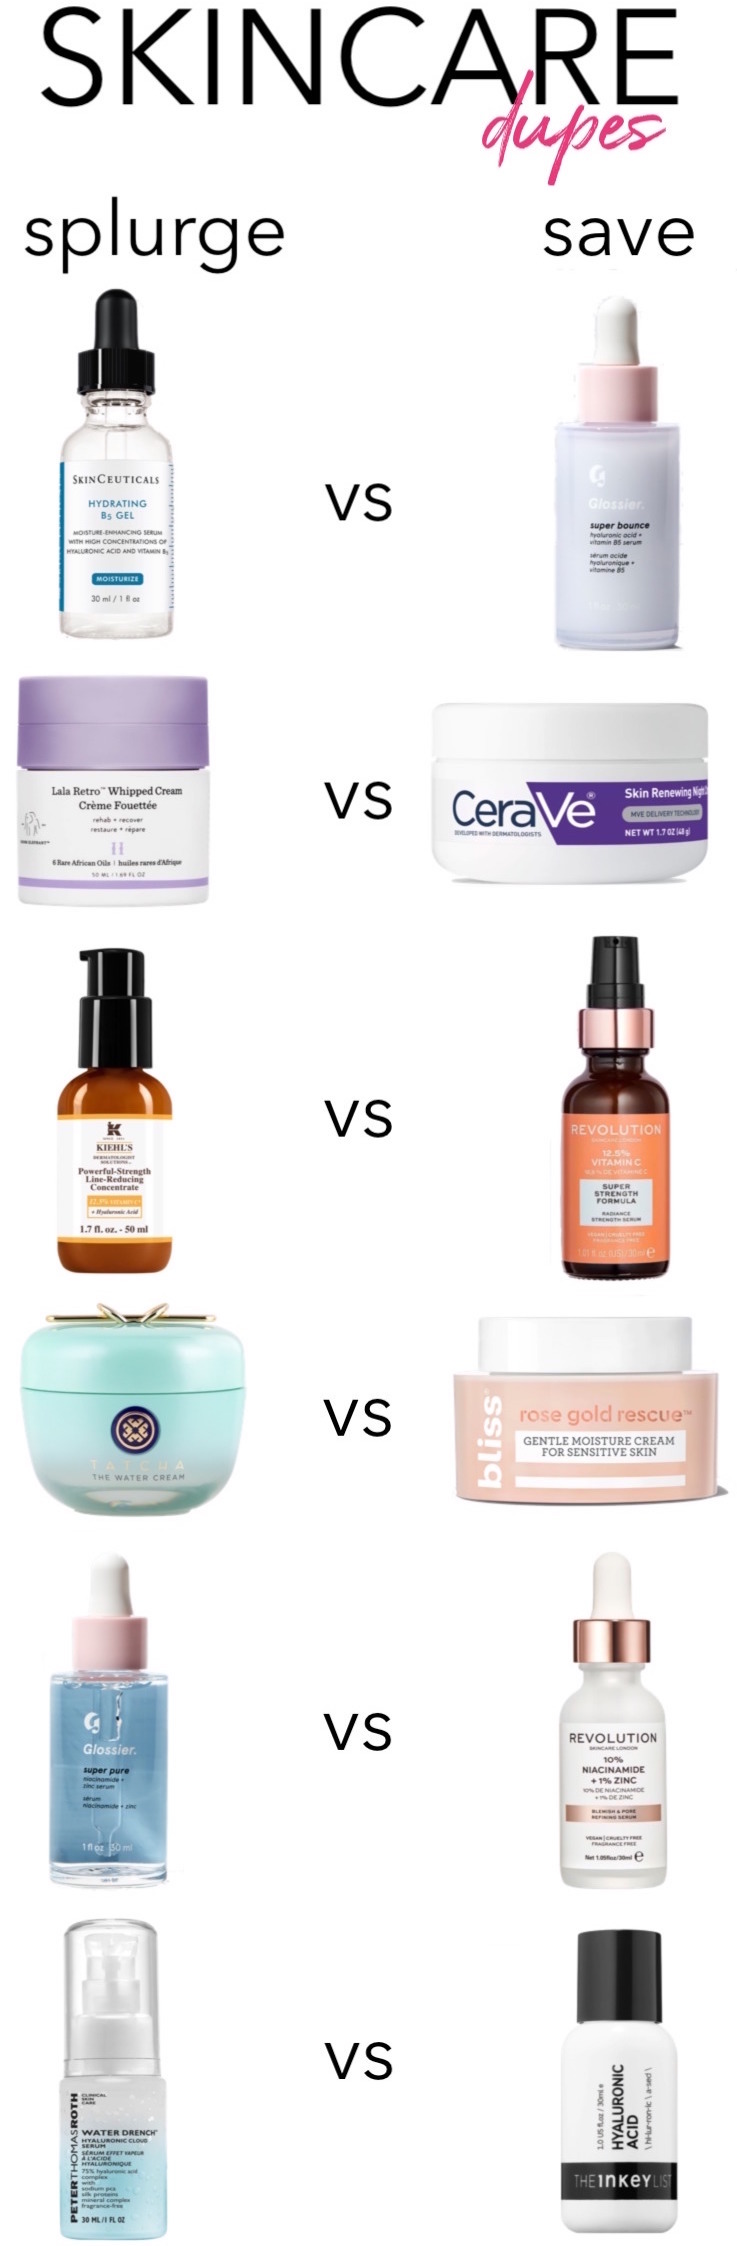 Affordable Skincare Dupes For Popular (And Pricey!) Products #drugstoredupes #skincaredupes #drugstoreskincare